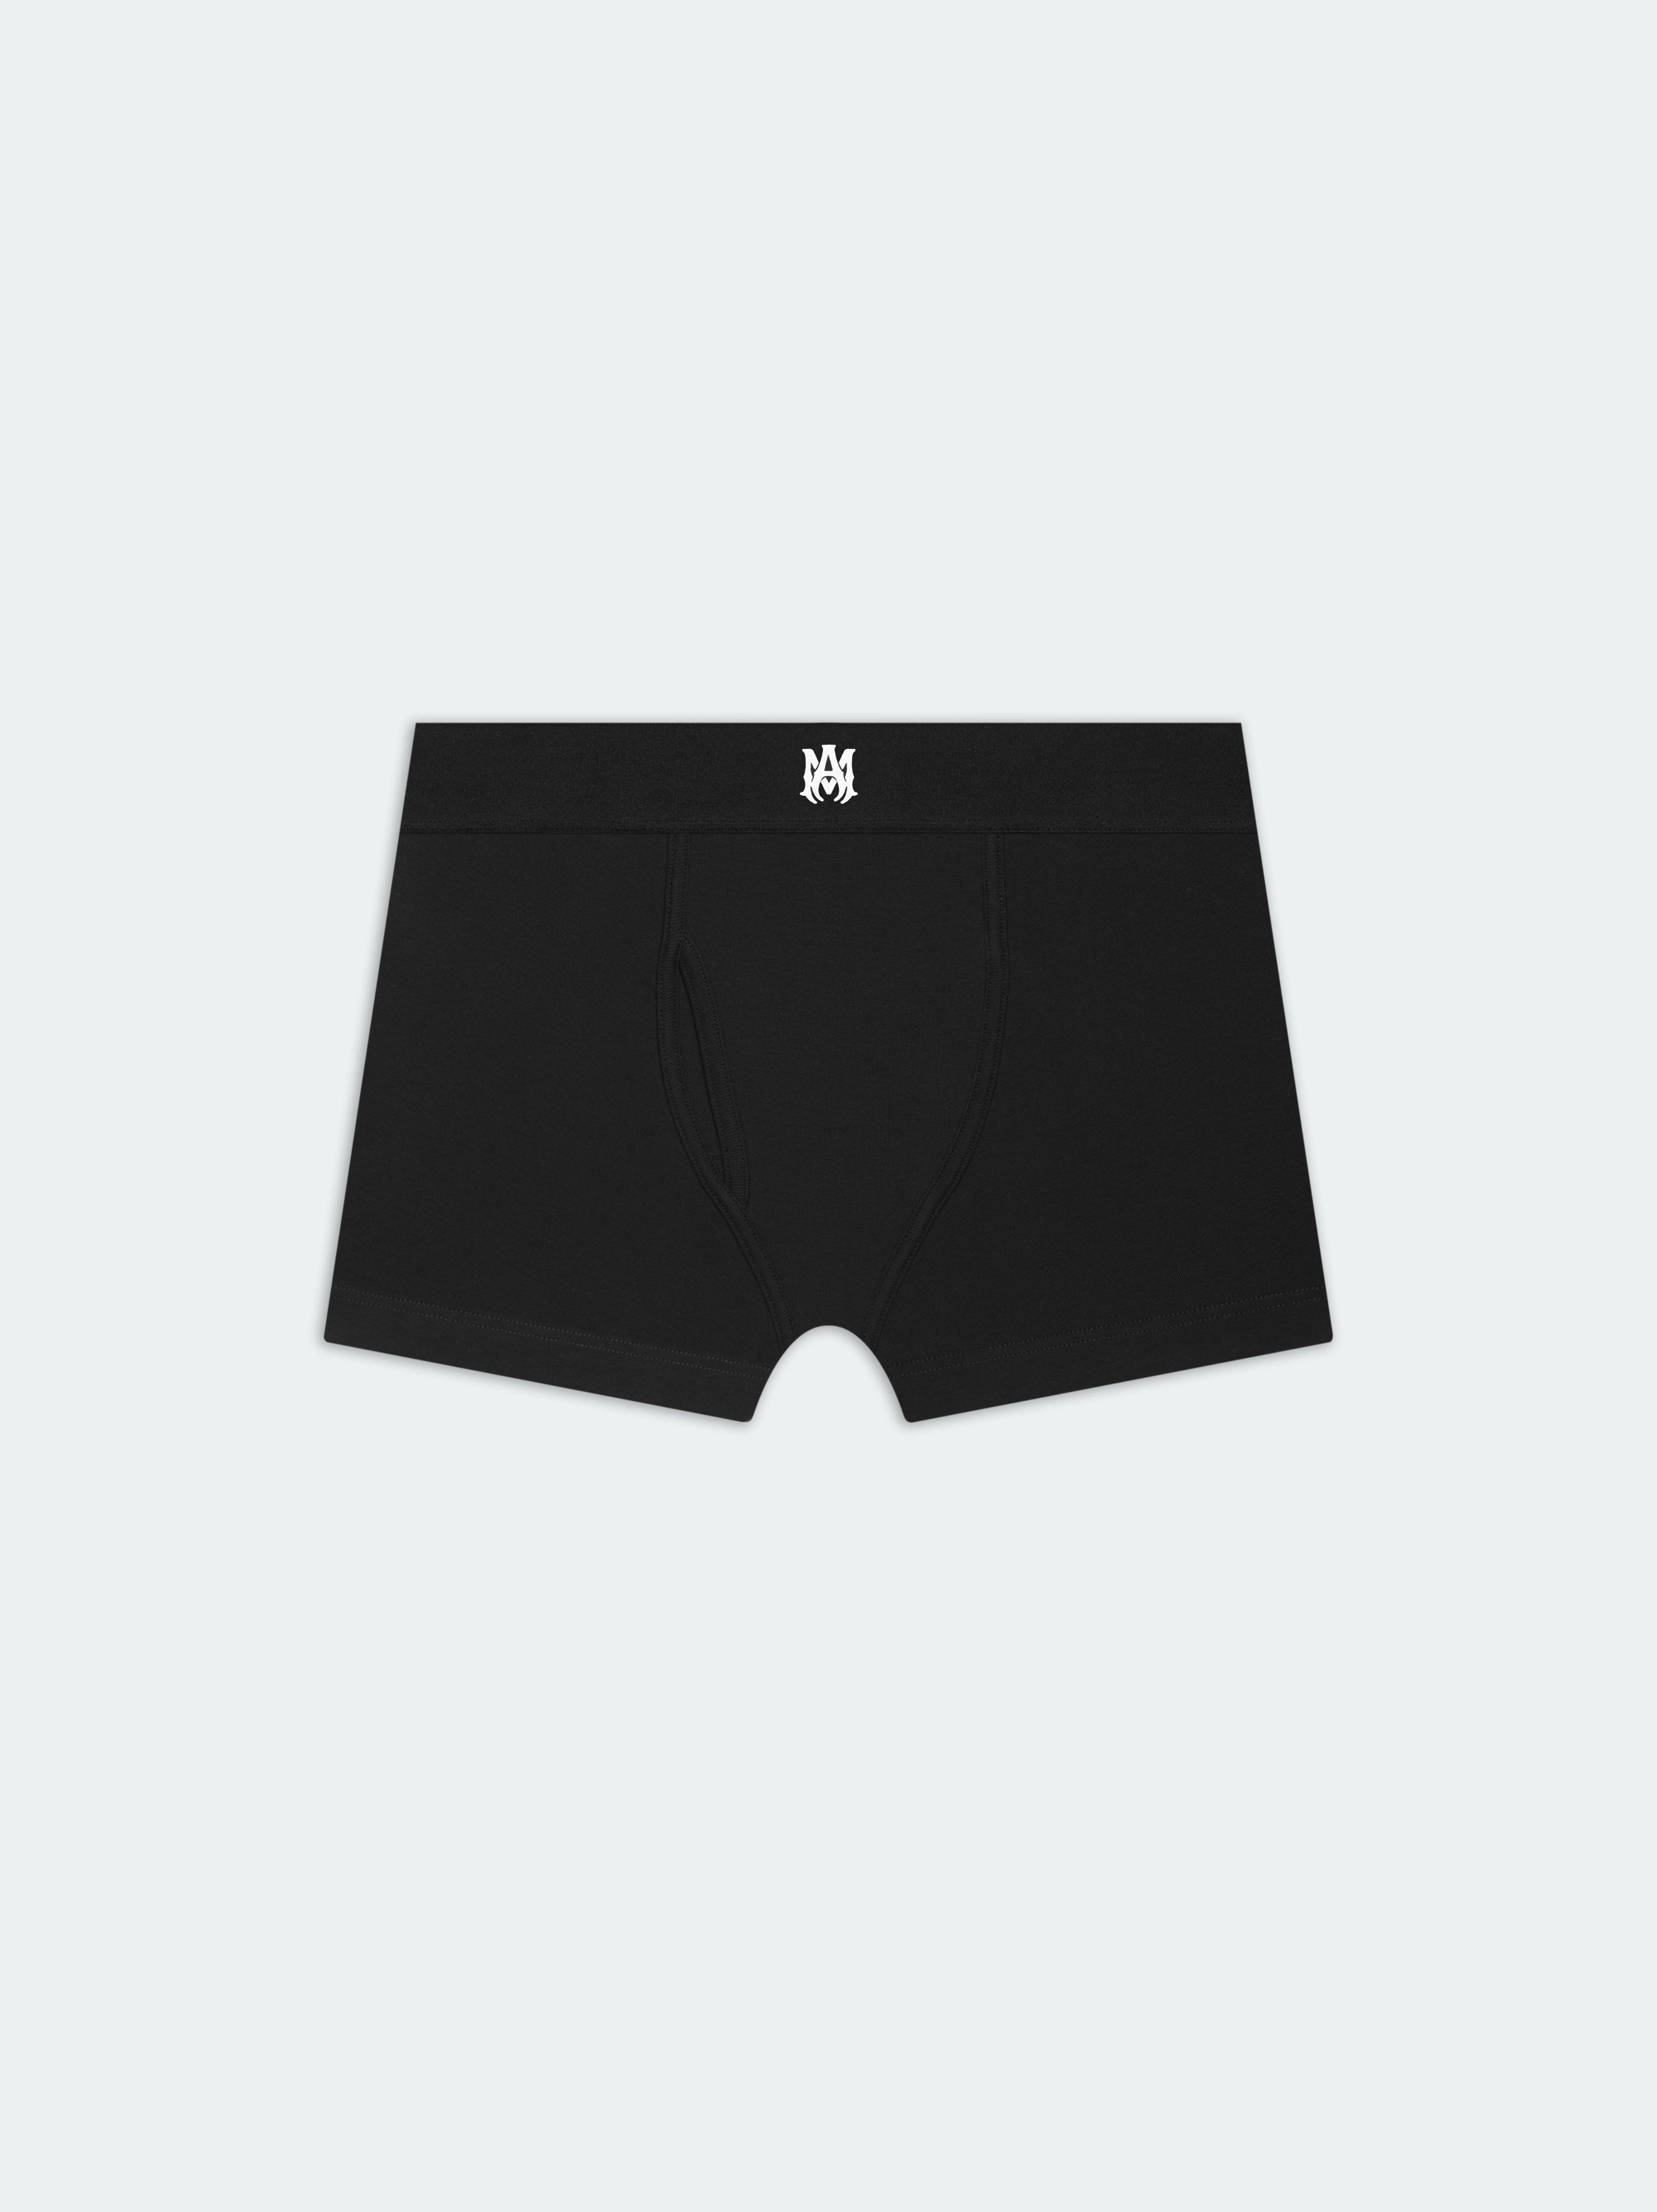 Product MA LOGO BRIEFS - Black featured image